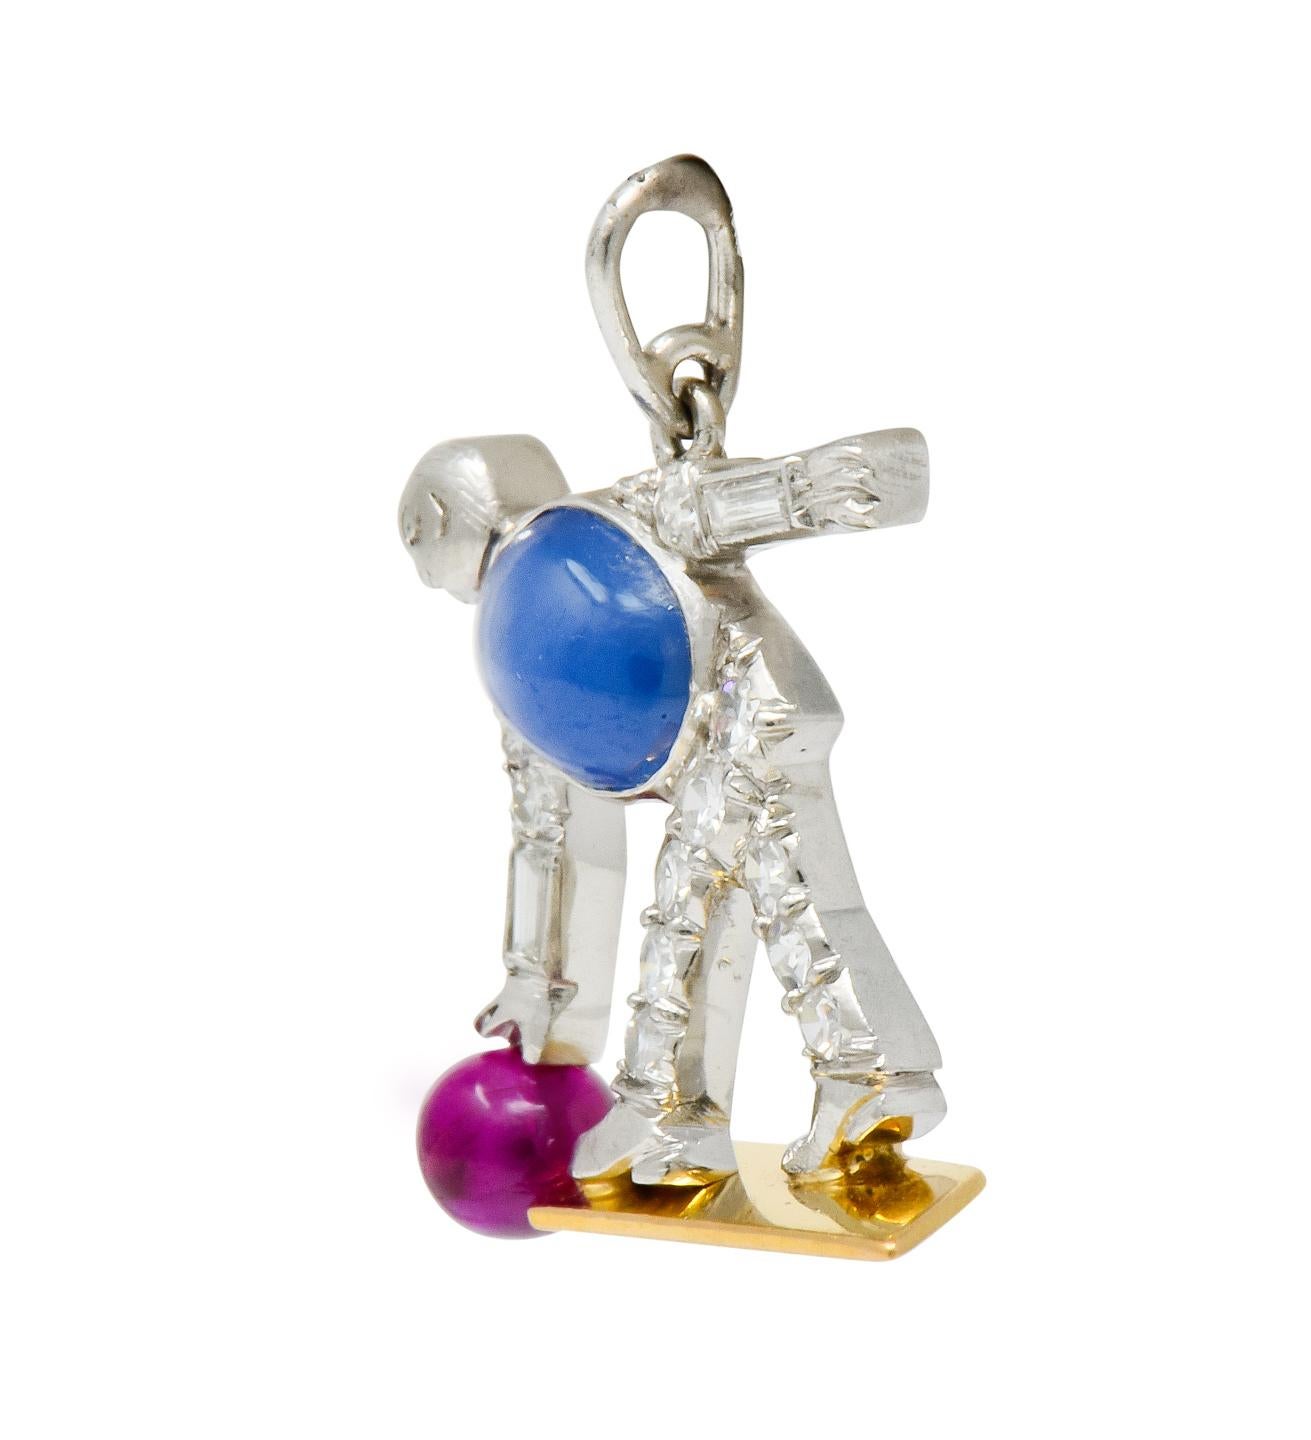 Designed as a bent over man about to release a ruby bead bowling ball down an 18 karat gold lane

Torso is comprised of a bezel set oval star sapphire cabochon; translucent and light blue in color with moderately strong six rayed star

Accented